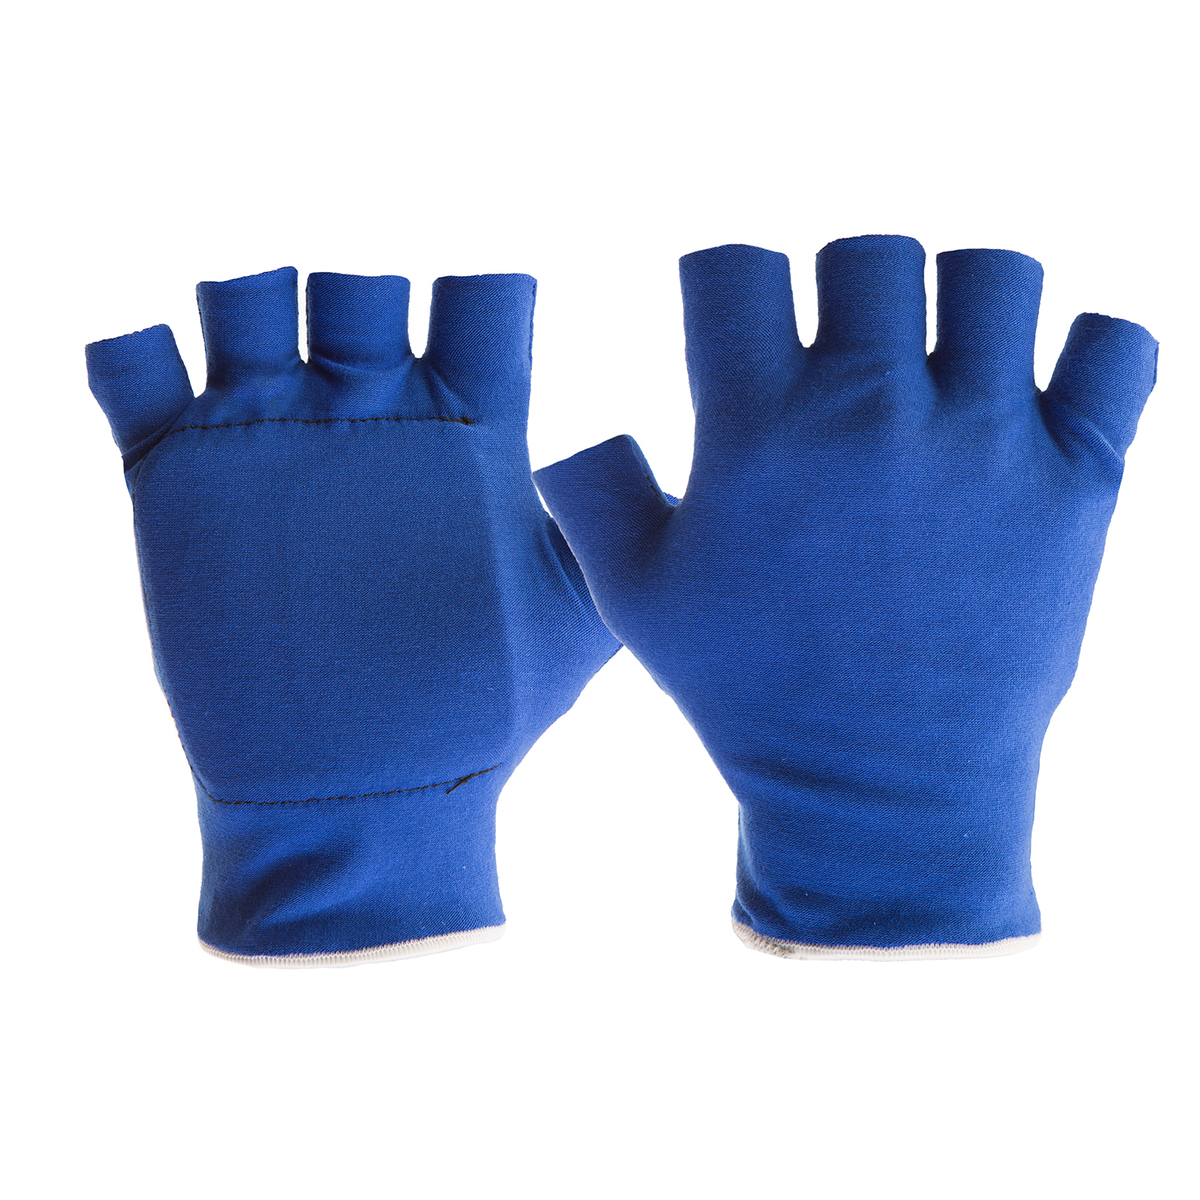 Impacto Protective Products Medium Blue Cotton And Polyester Half Finger Anti-Impact Mechanics Gloves Liner